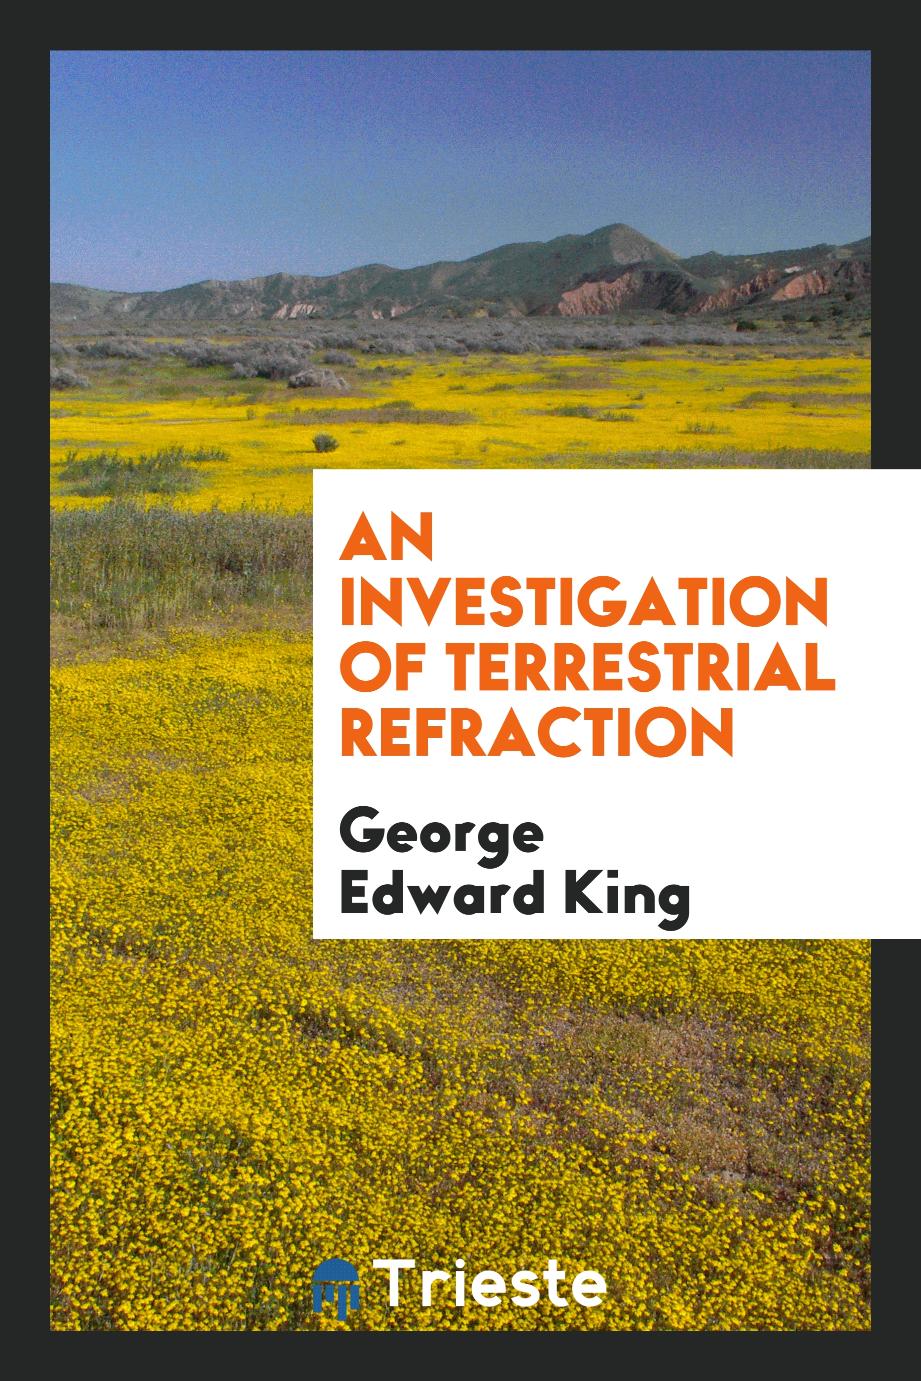 An Investigation of Terrestrial Refraction